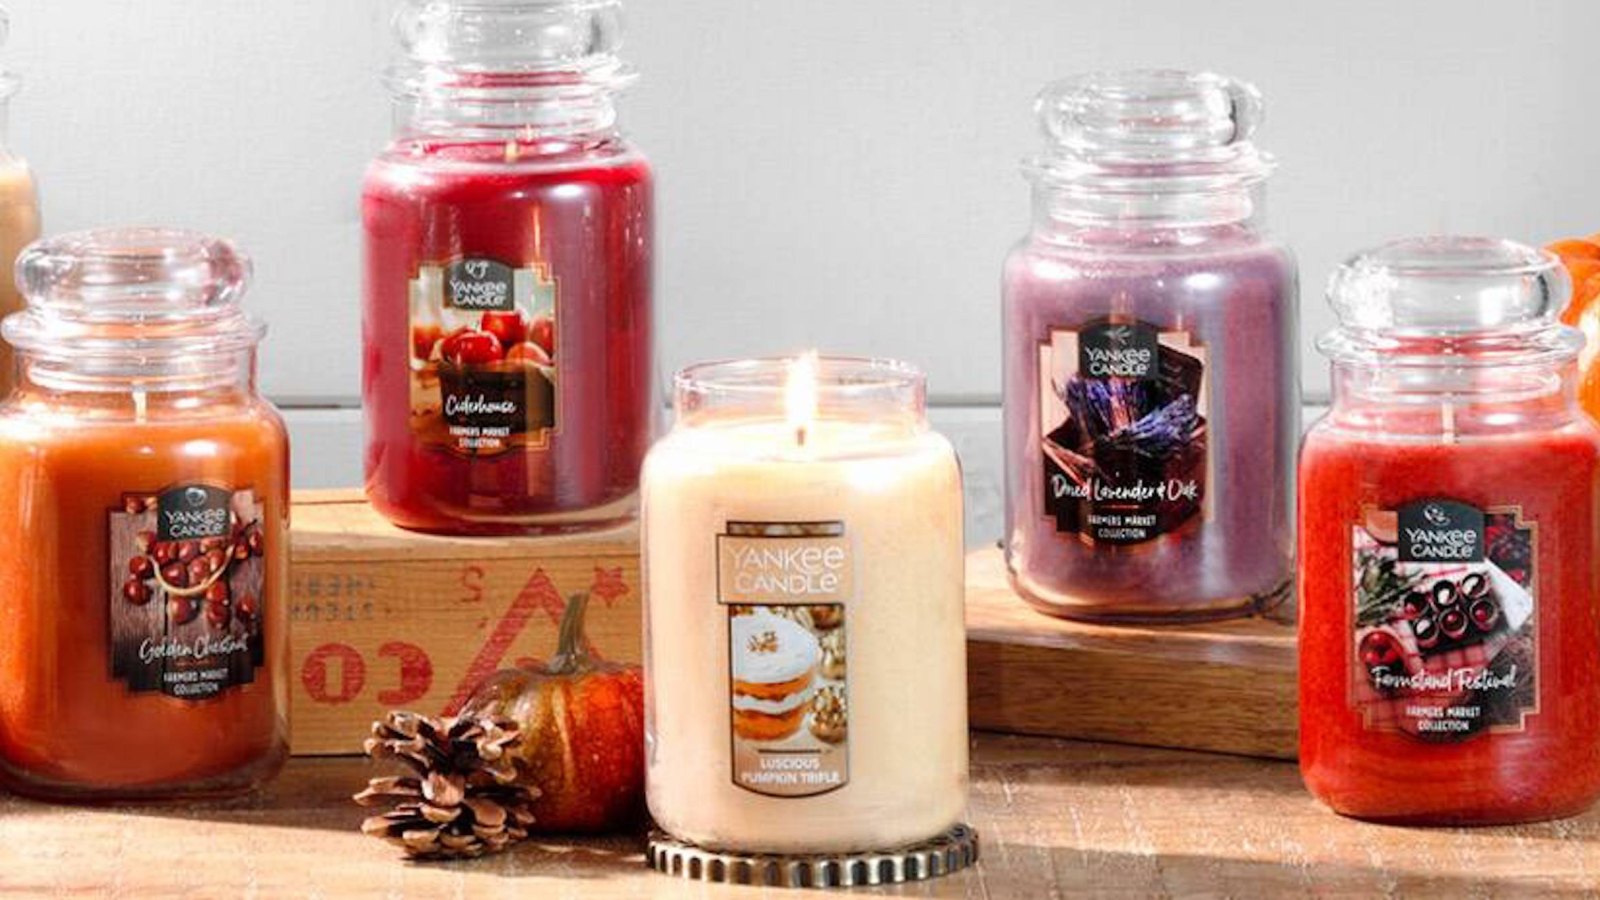 Yankee Candle October 2019 Flash Sale